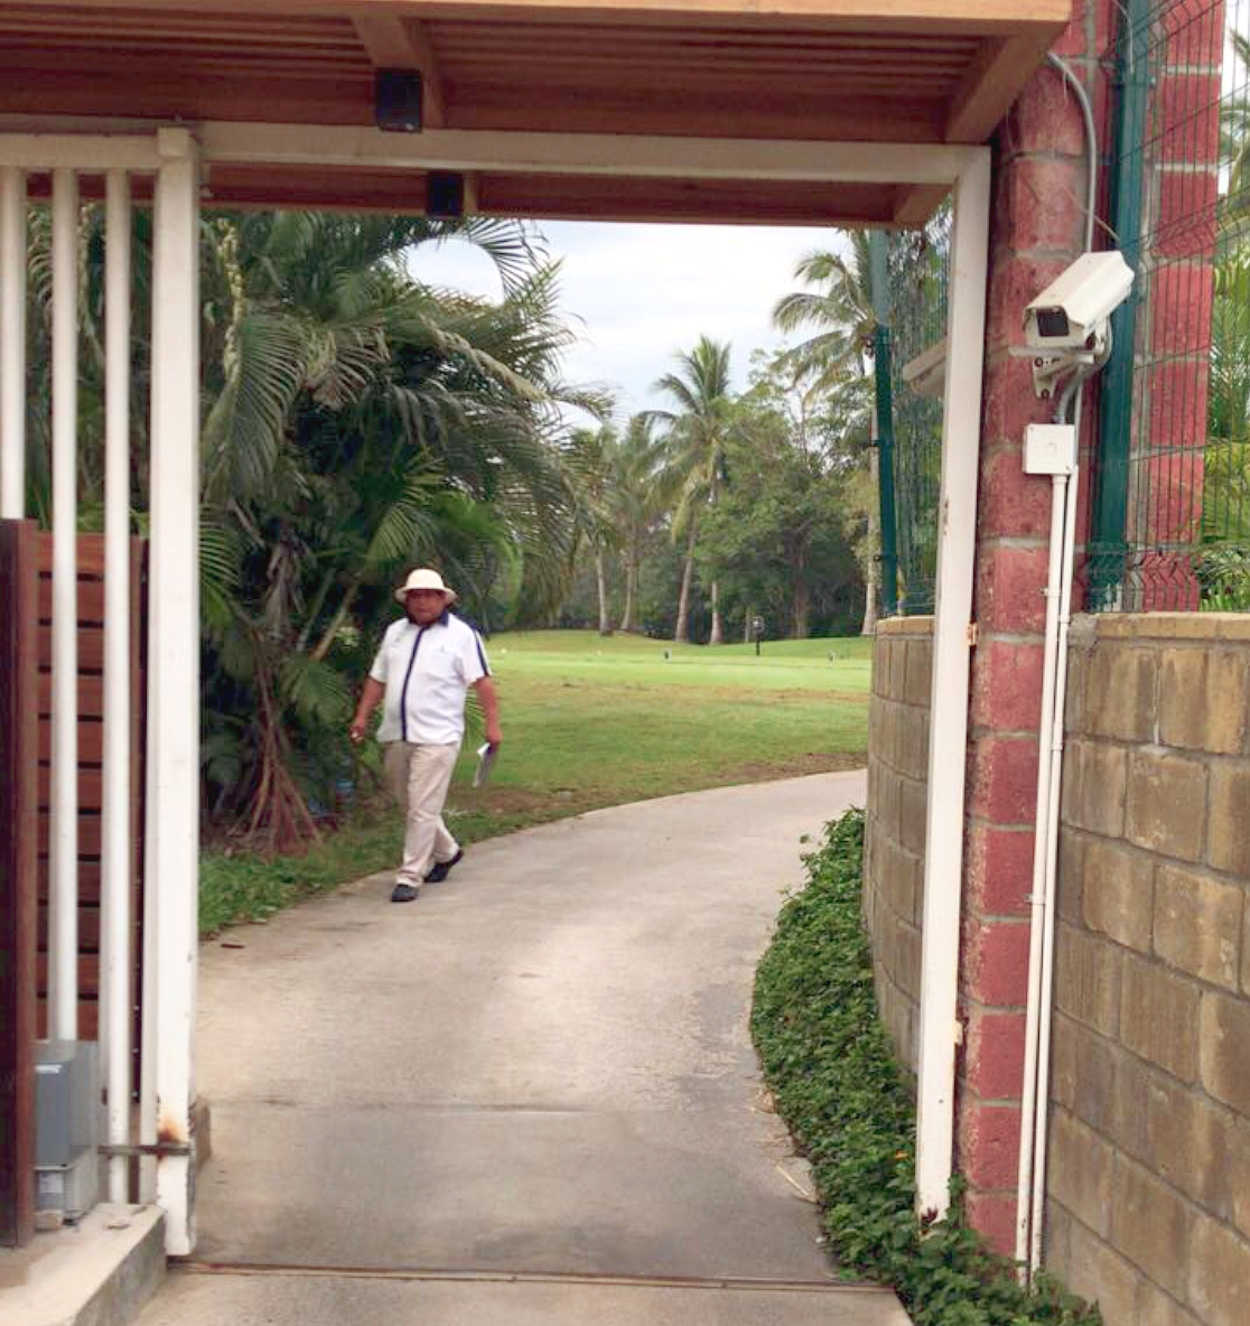 Have Aimfair and other Vidanta Members been successful at opening a gate for access to and egress from Vidanta's Nuevo Vallarta  property?  Let us know....